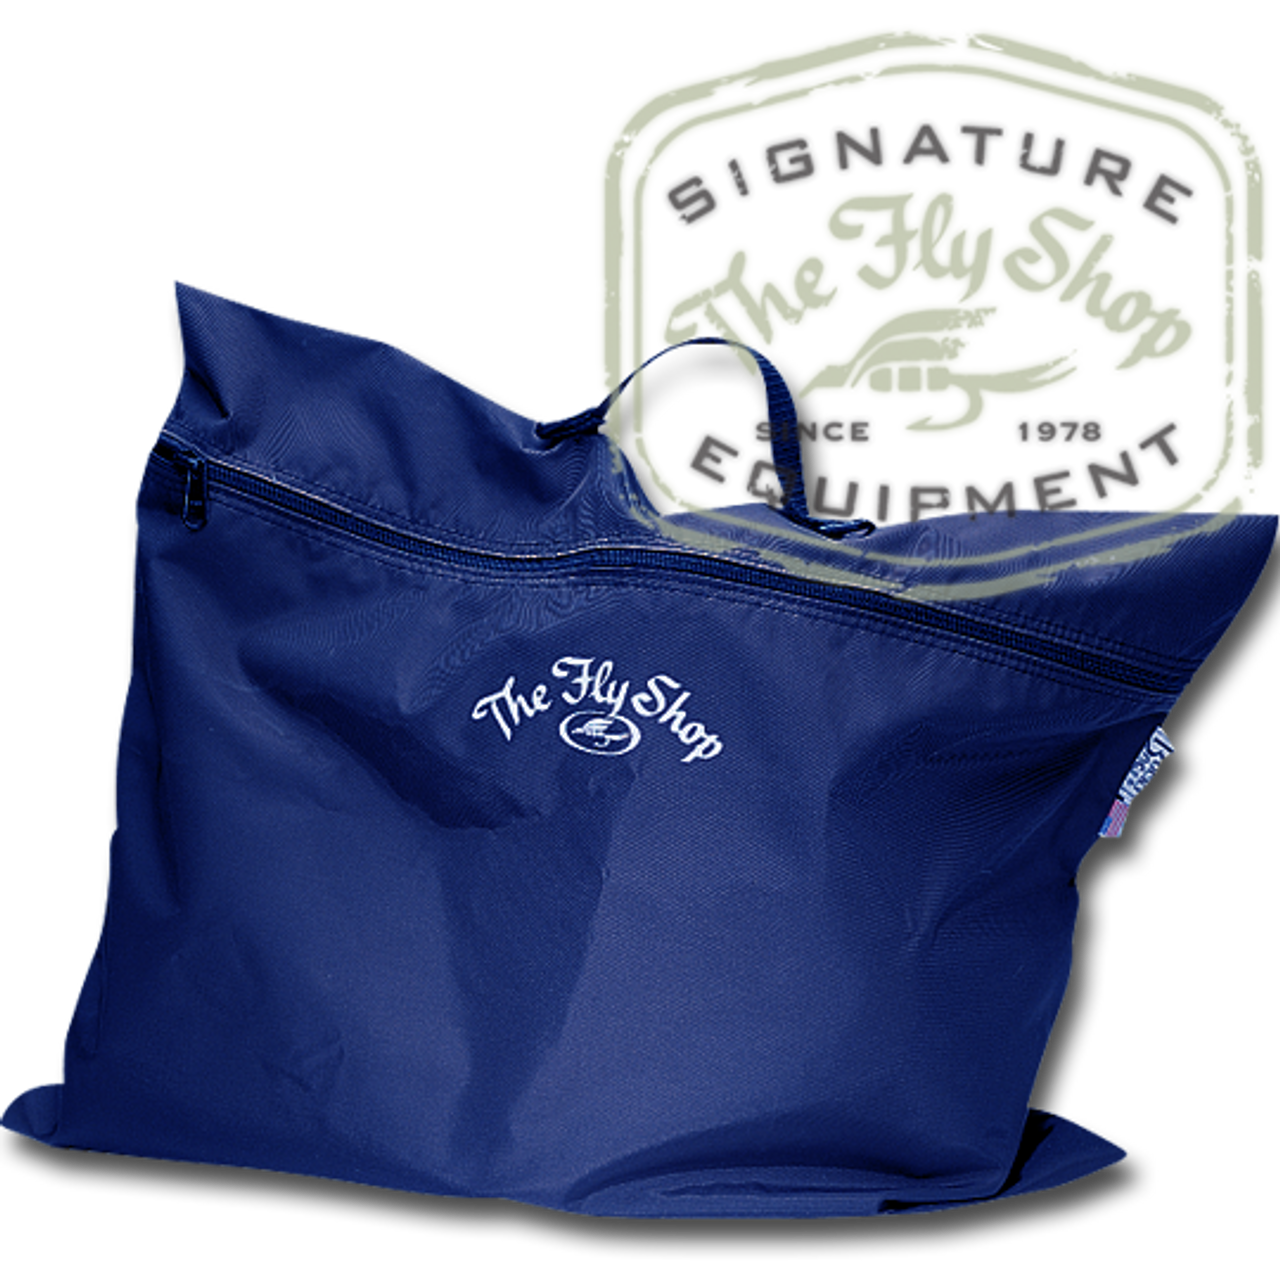 The Fly Shop's Laundry/Wading Bag - Navy